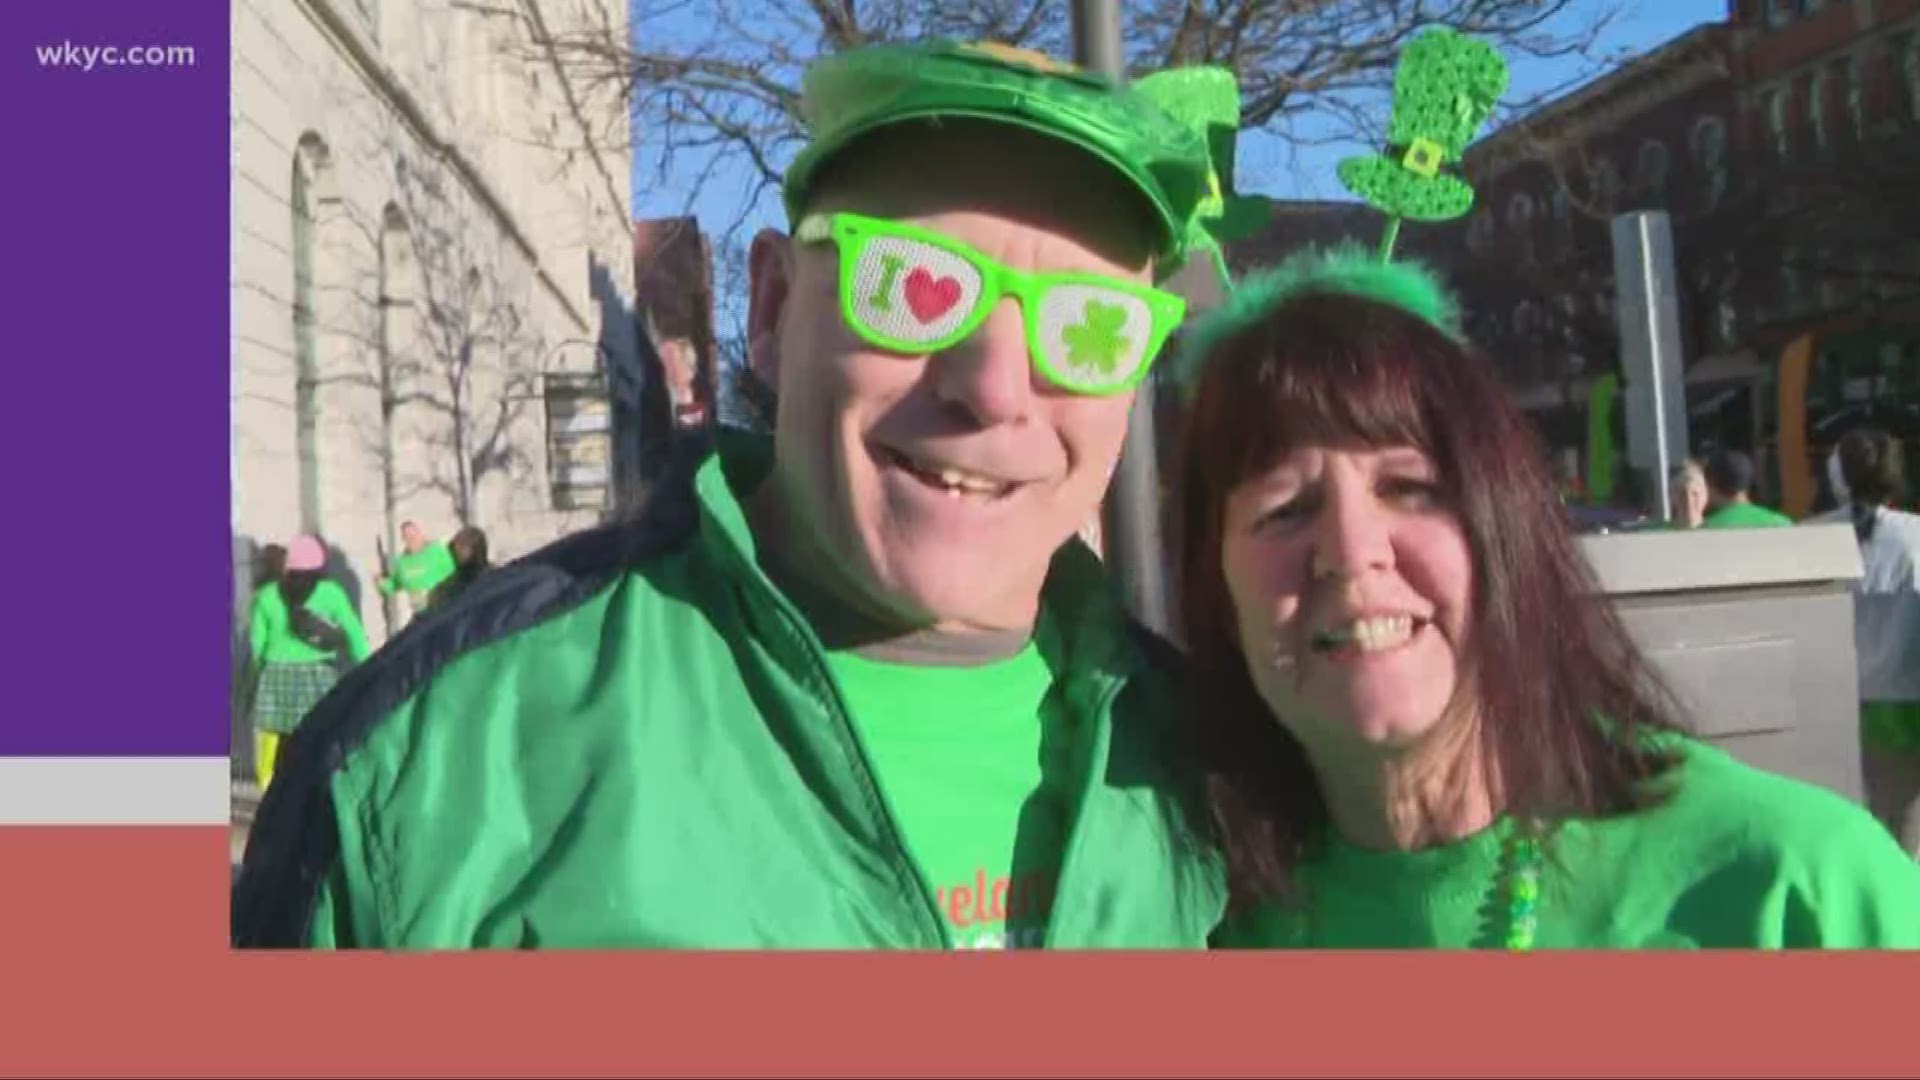 When it comes to St. Patrick's Day, Cleveland is one of the best places to be. A new WalletHub study reveals Cleveland has been ranked among the top 10 places.